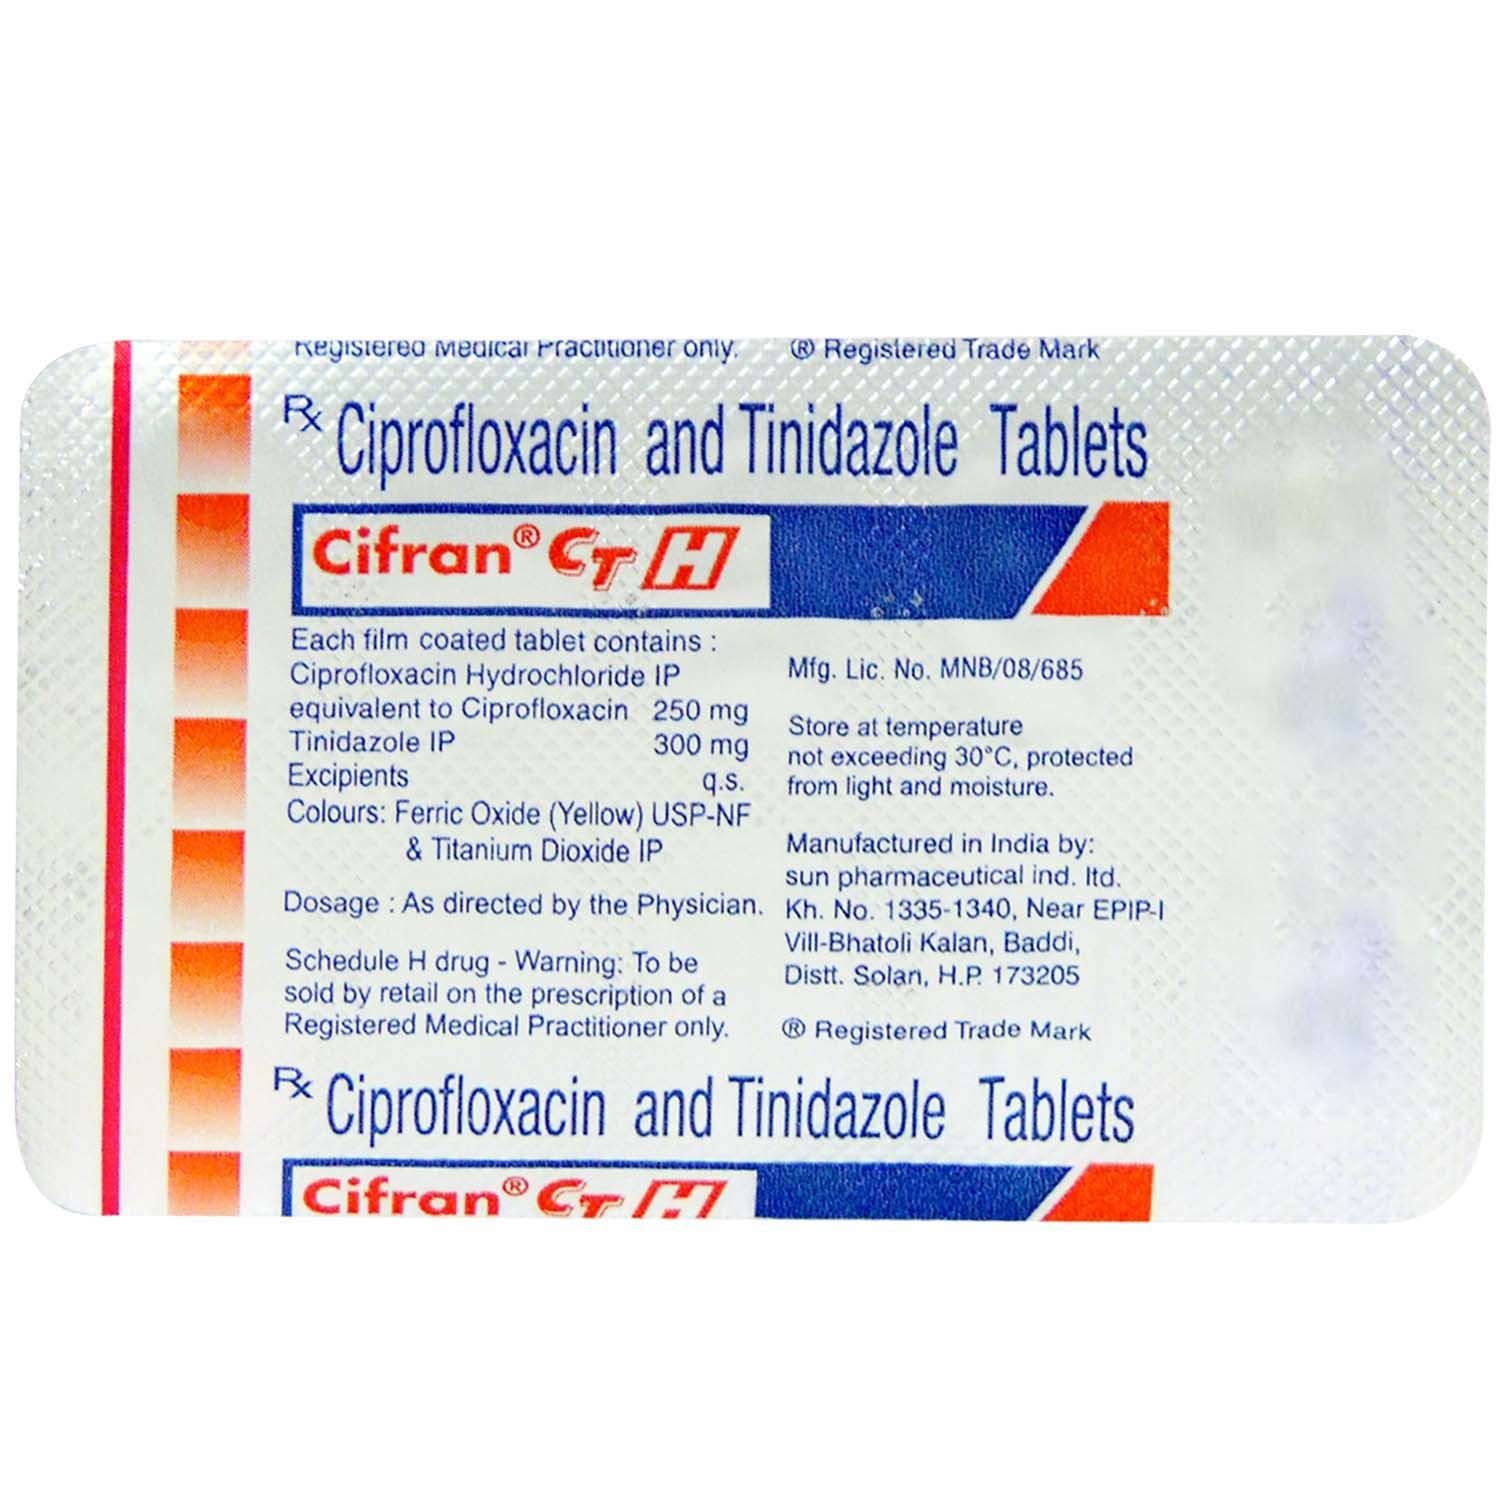 Cifran Ct H Tablet Price Uses Side Effects Composition Apollo Pharmacy